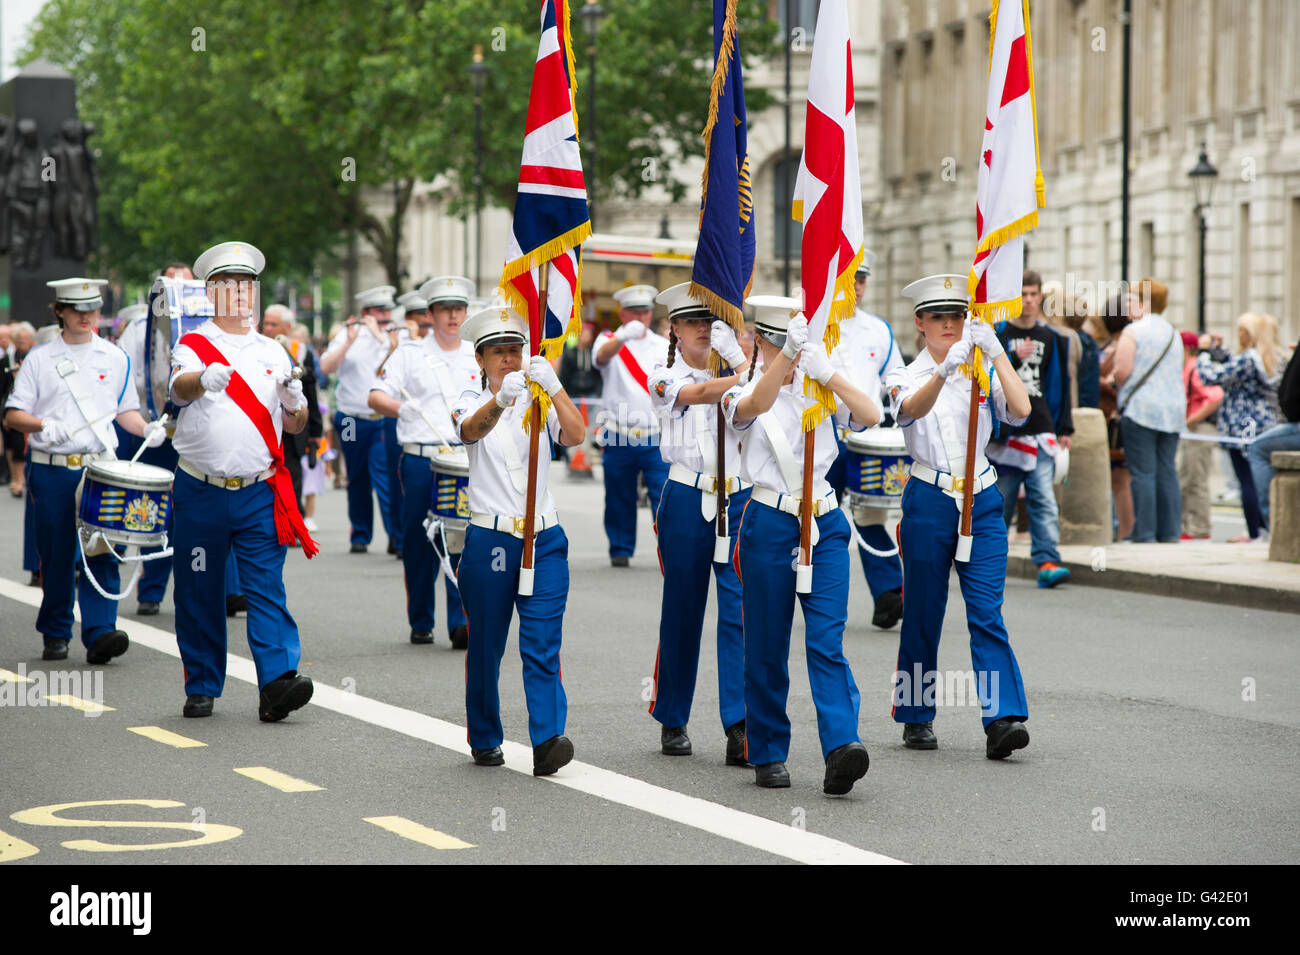 London, England, UK. 18th, June, Grand Orange Lodge Of England Parade (To Mark H.M. The Queen's 90th Birthday). The bands marched down Whitehall. Credit:  Andrew Steven Graham/Alamy Live News Stock Photo